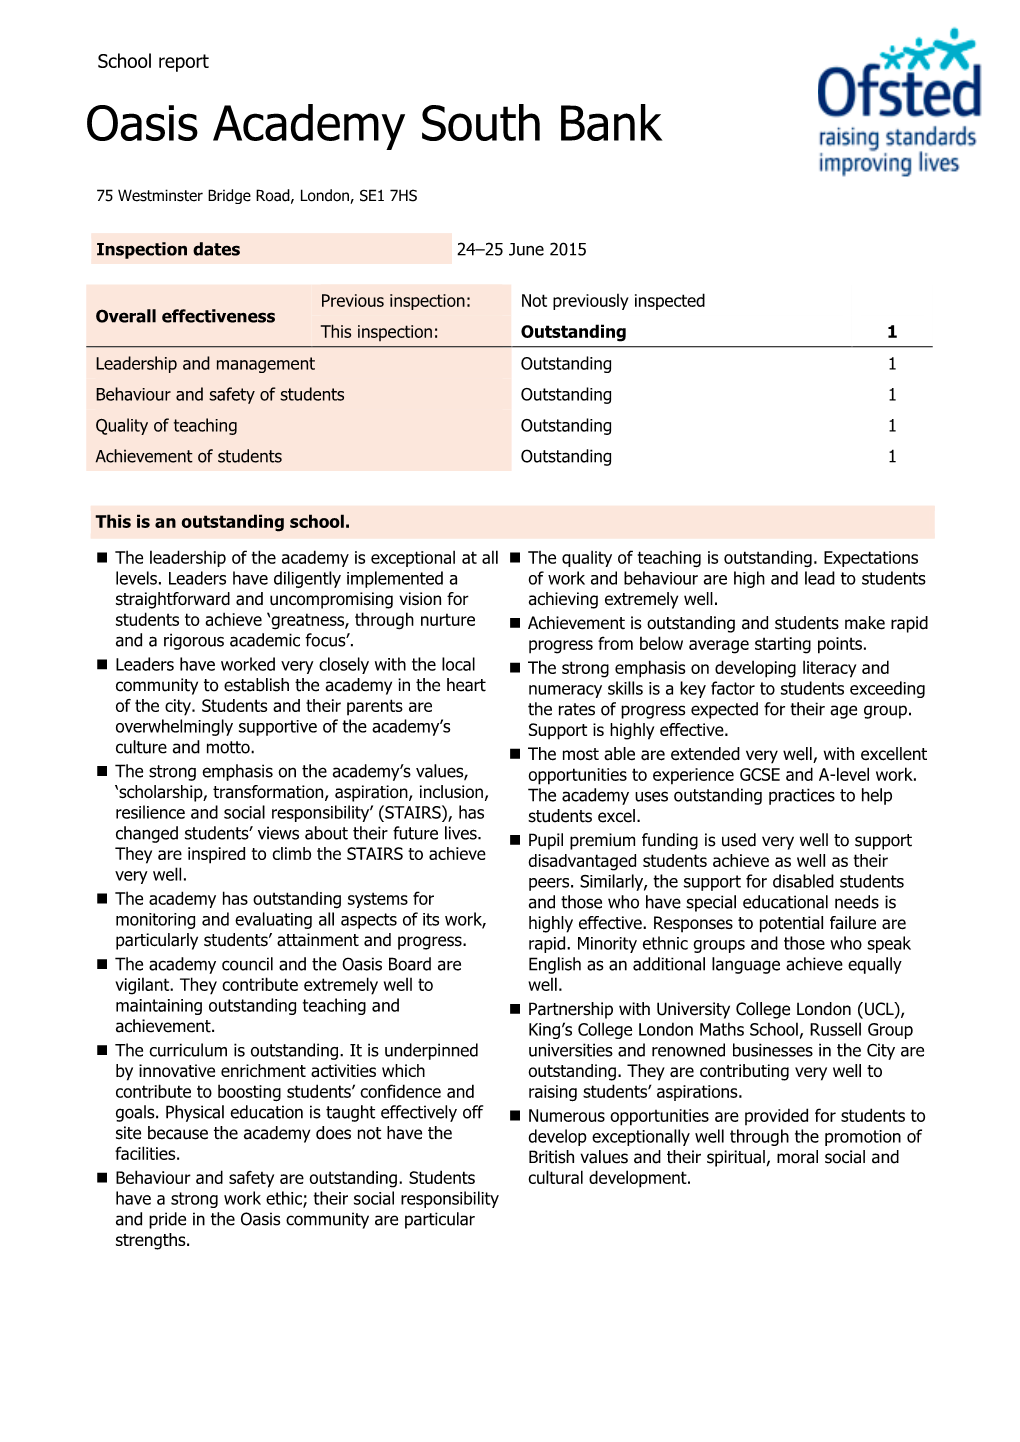 Ofsted Report.Pdf